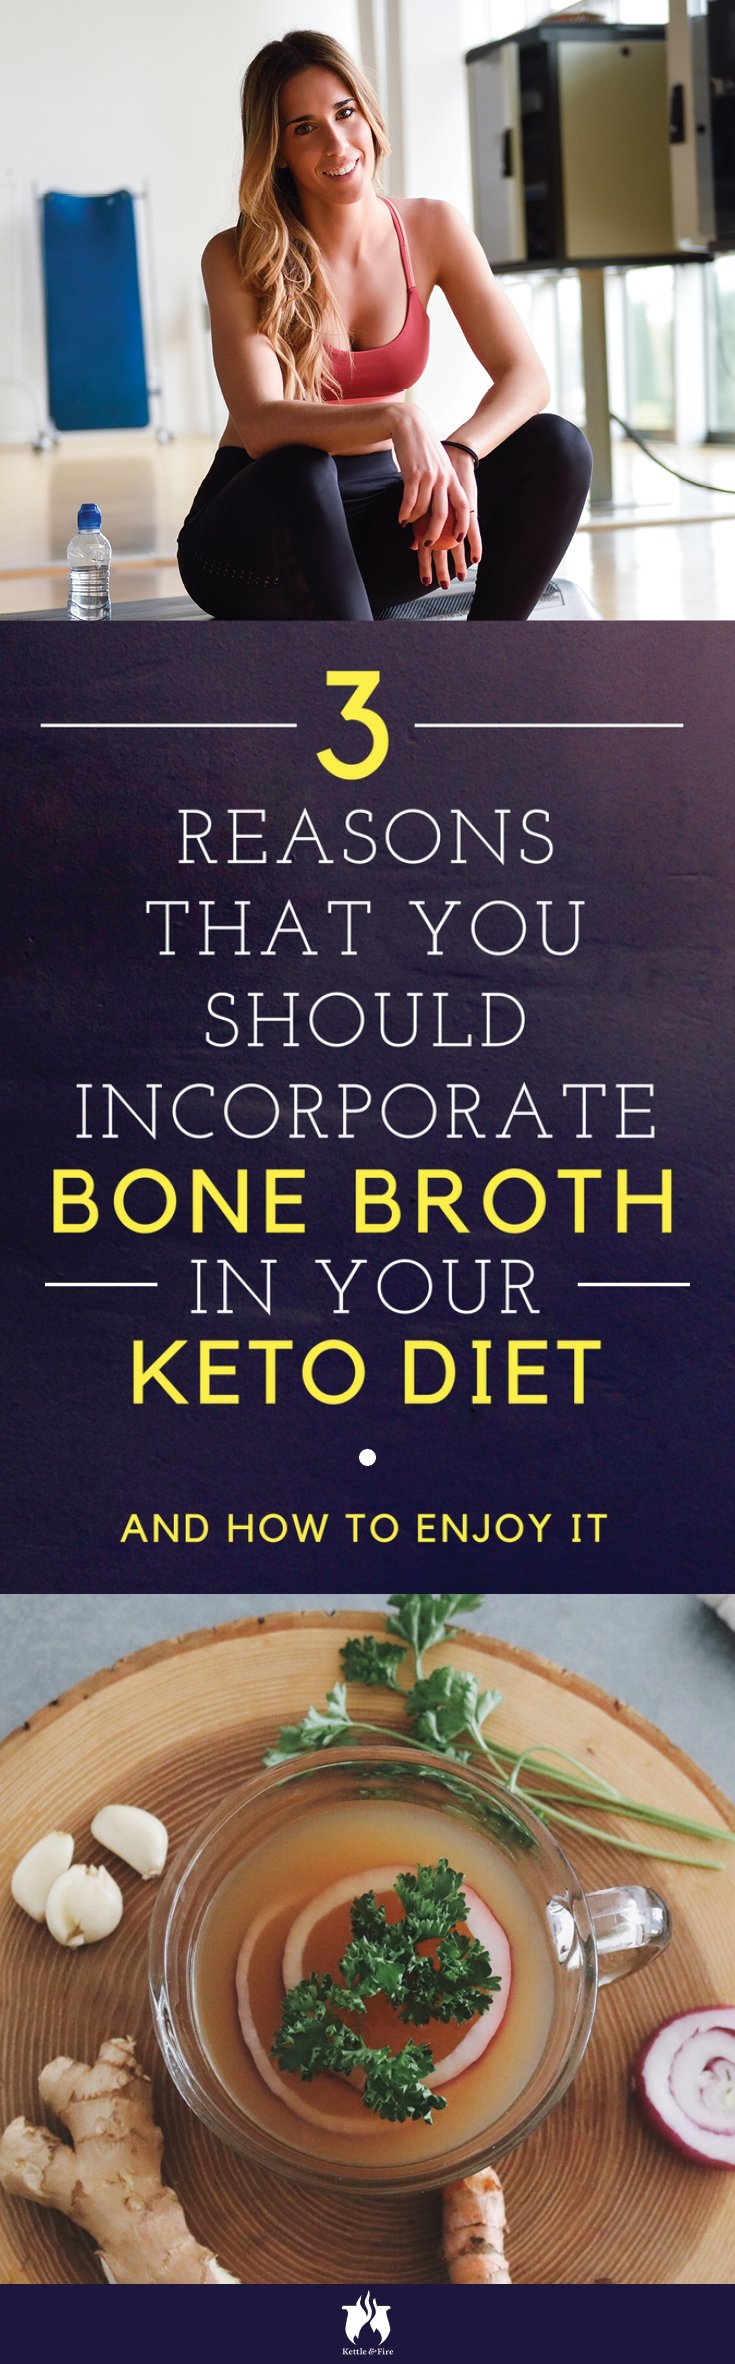 Bone broth is an established superfood embraced for its healing properties. So how does bone broth fit into a Ketogenic diet? Let's dive in.